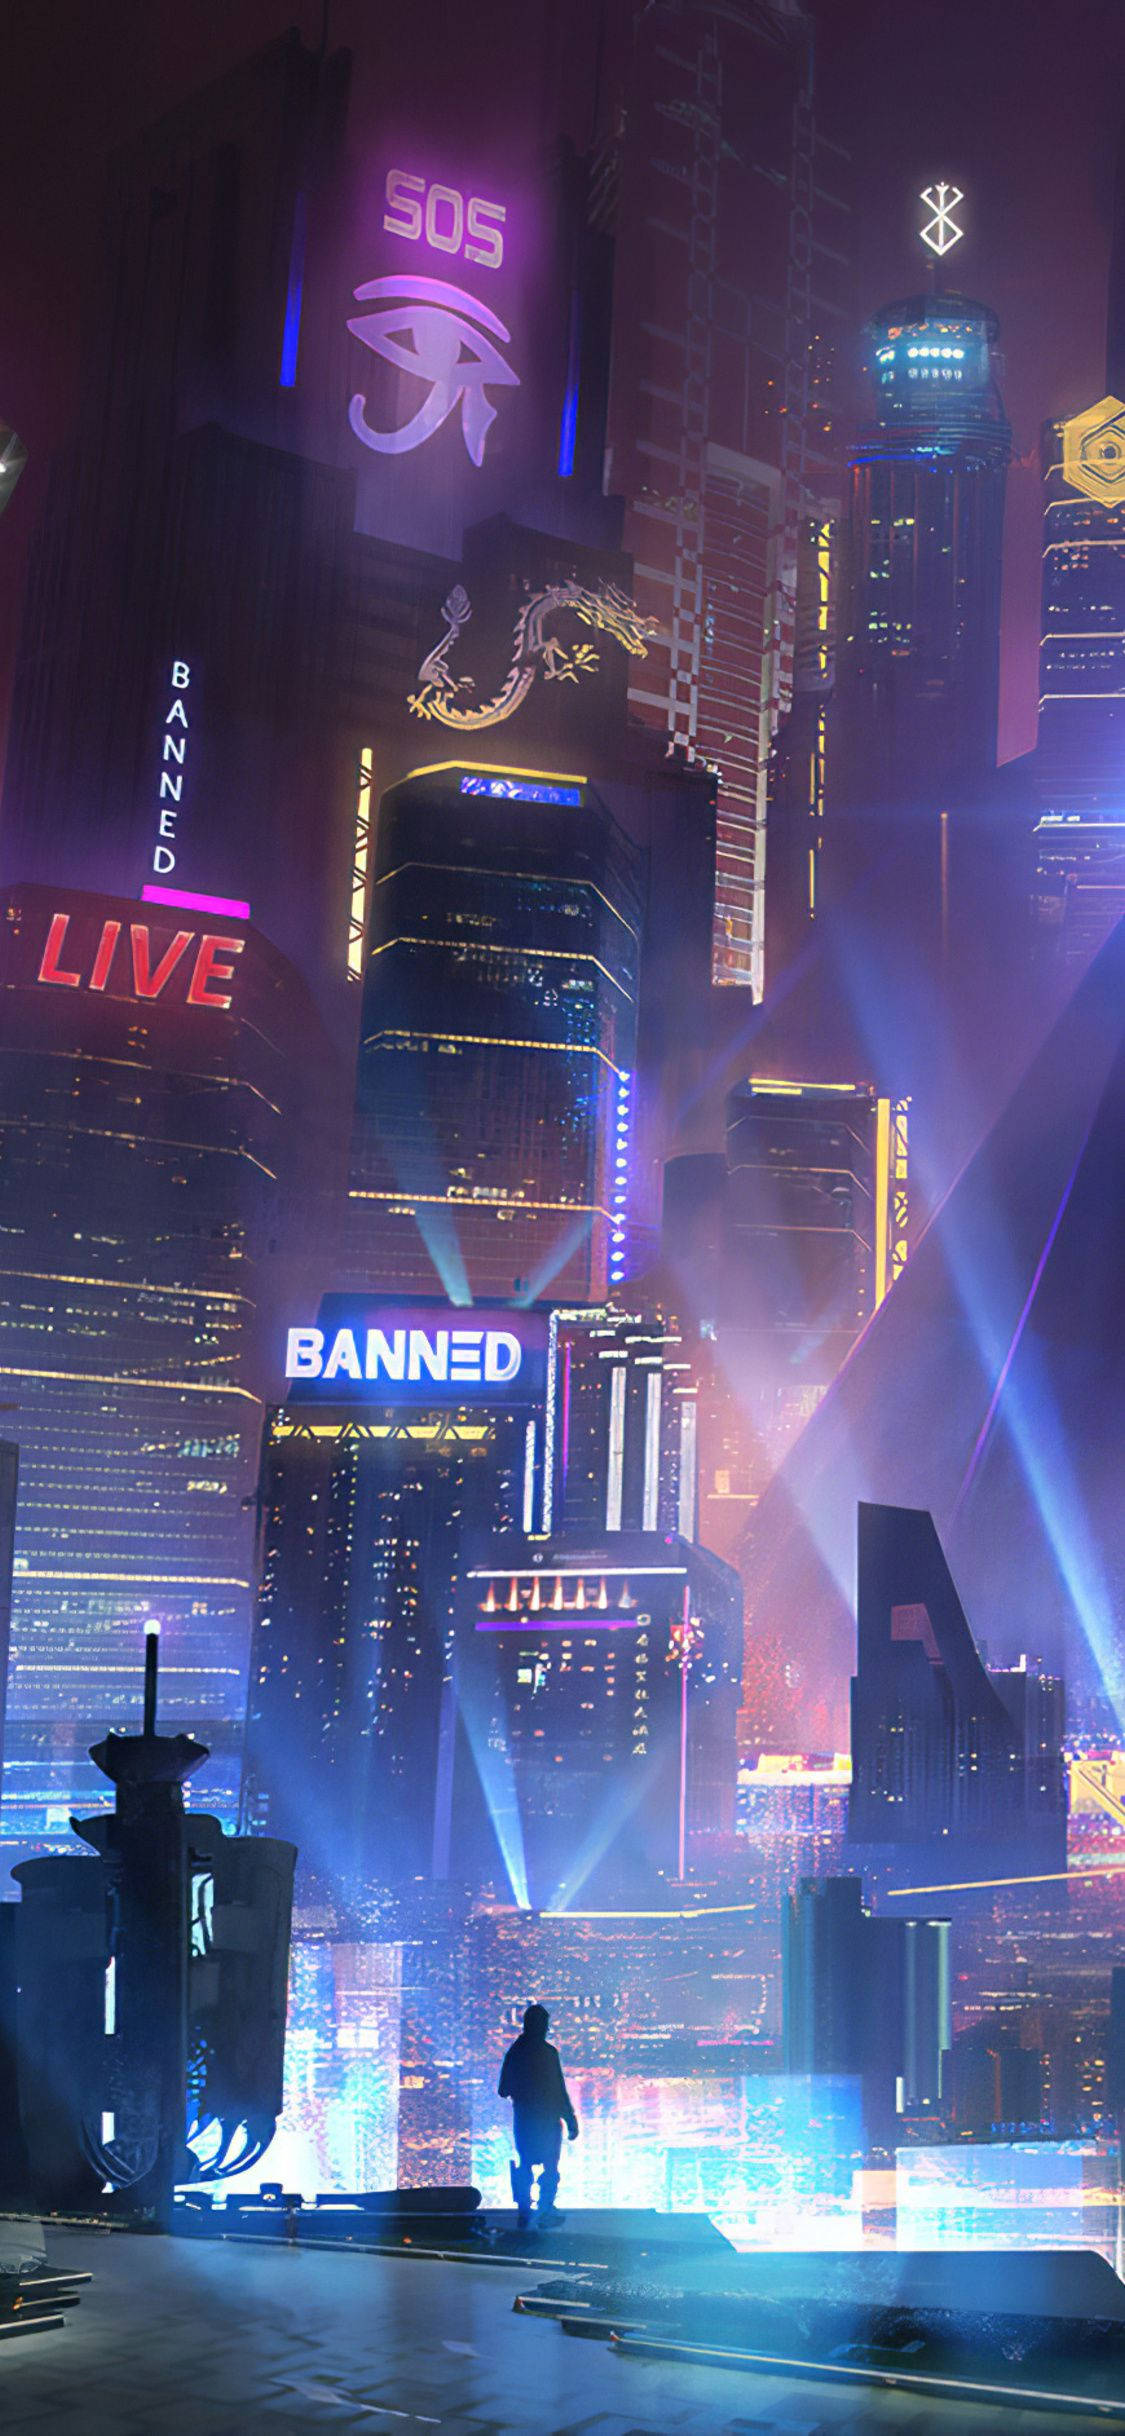 cyberpunk aesthetic 1080P 2k 4k Full HD Wallpapers Backgrounds Free  Download  Wallpaper Crafter